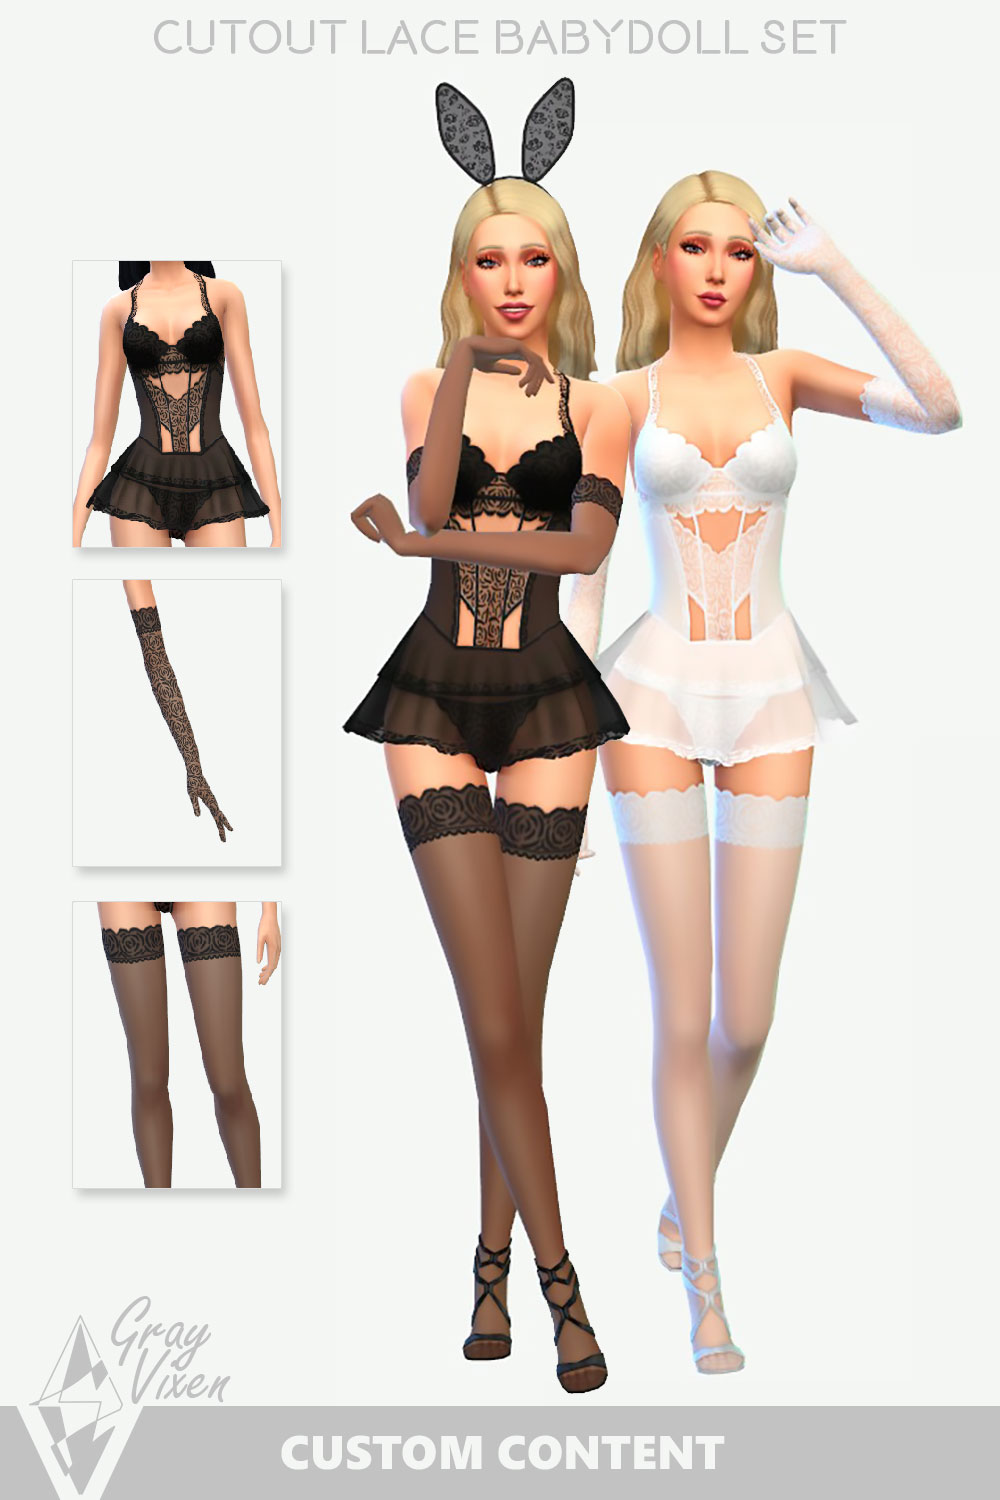 https://thesims4.customcontent.net/wp-content/uploads/sites/2/2023/03/The-Sims-4-Cutout-Lace-Babydoll-Set-1.jpg